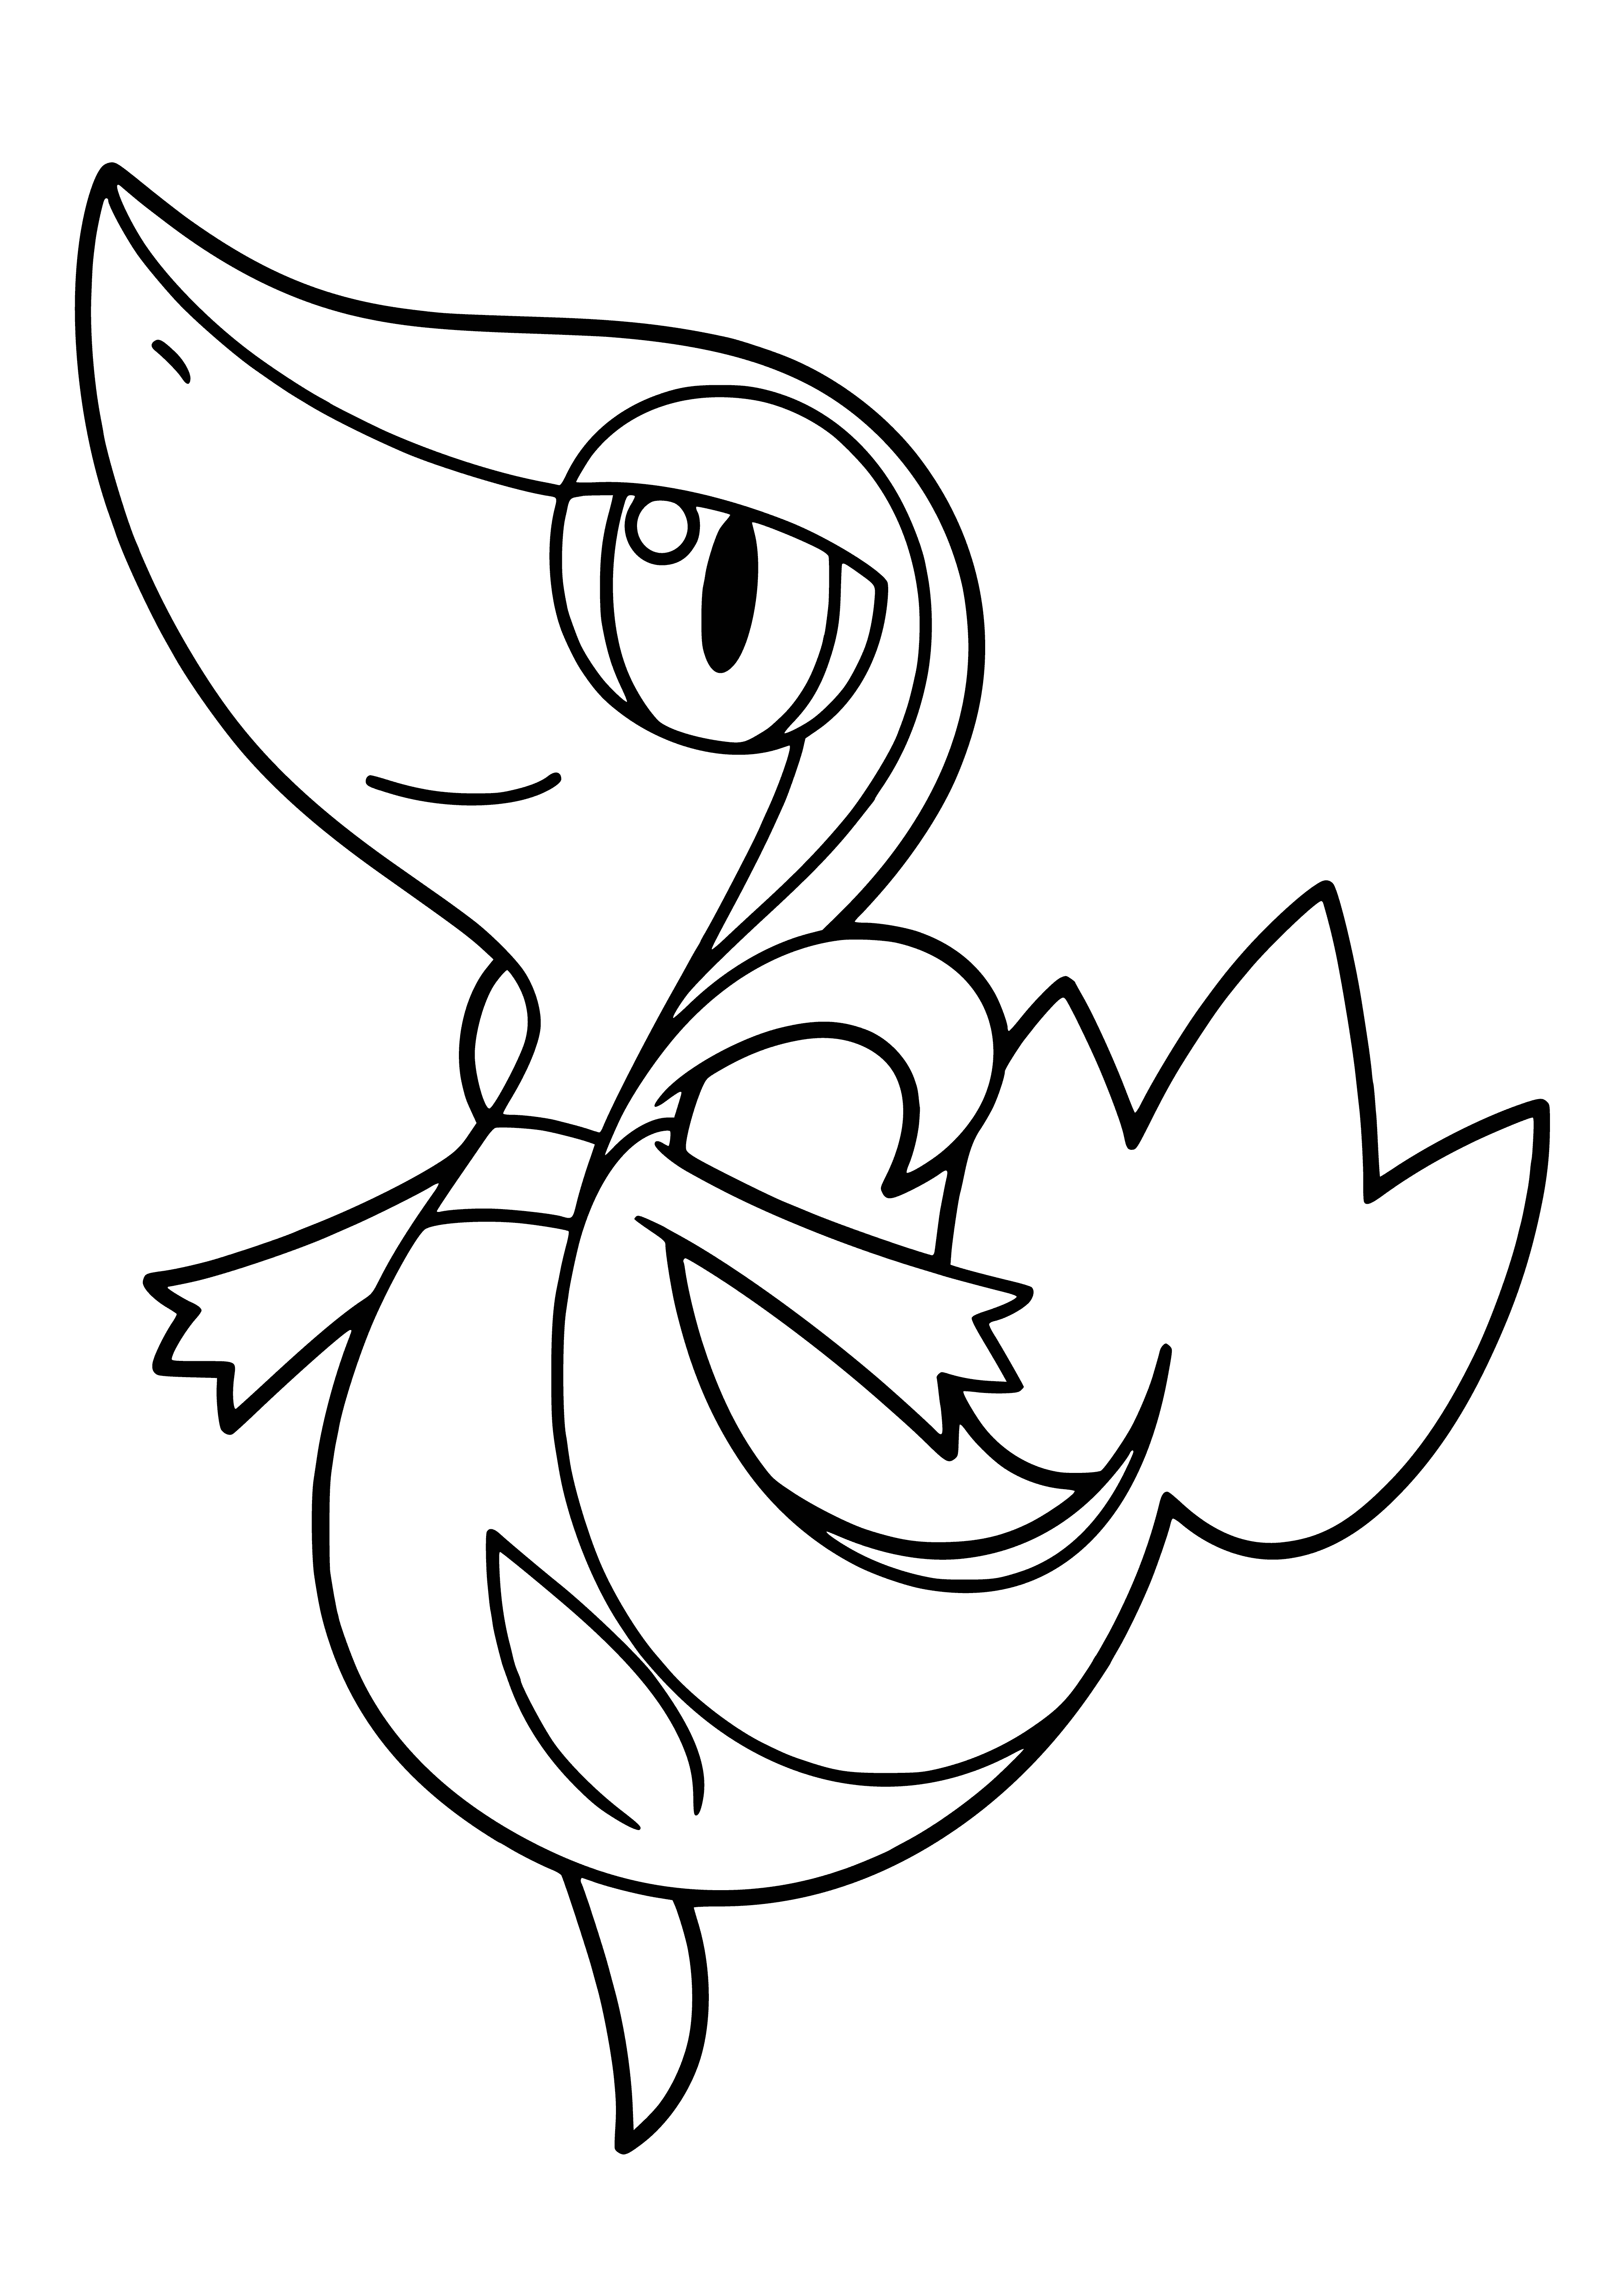 coloring page: The small, green snake-like Pokemon Snivy has a thin body, round eyes, white belly & 2 leaves on its back.